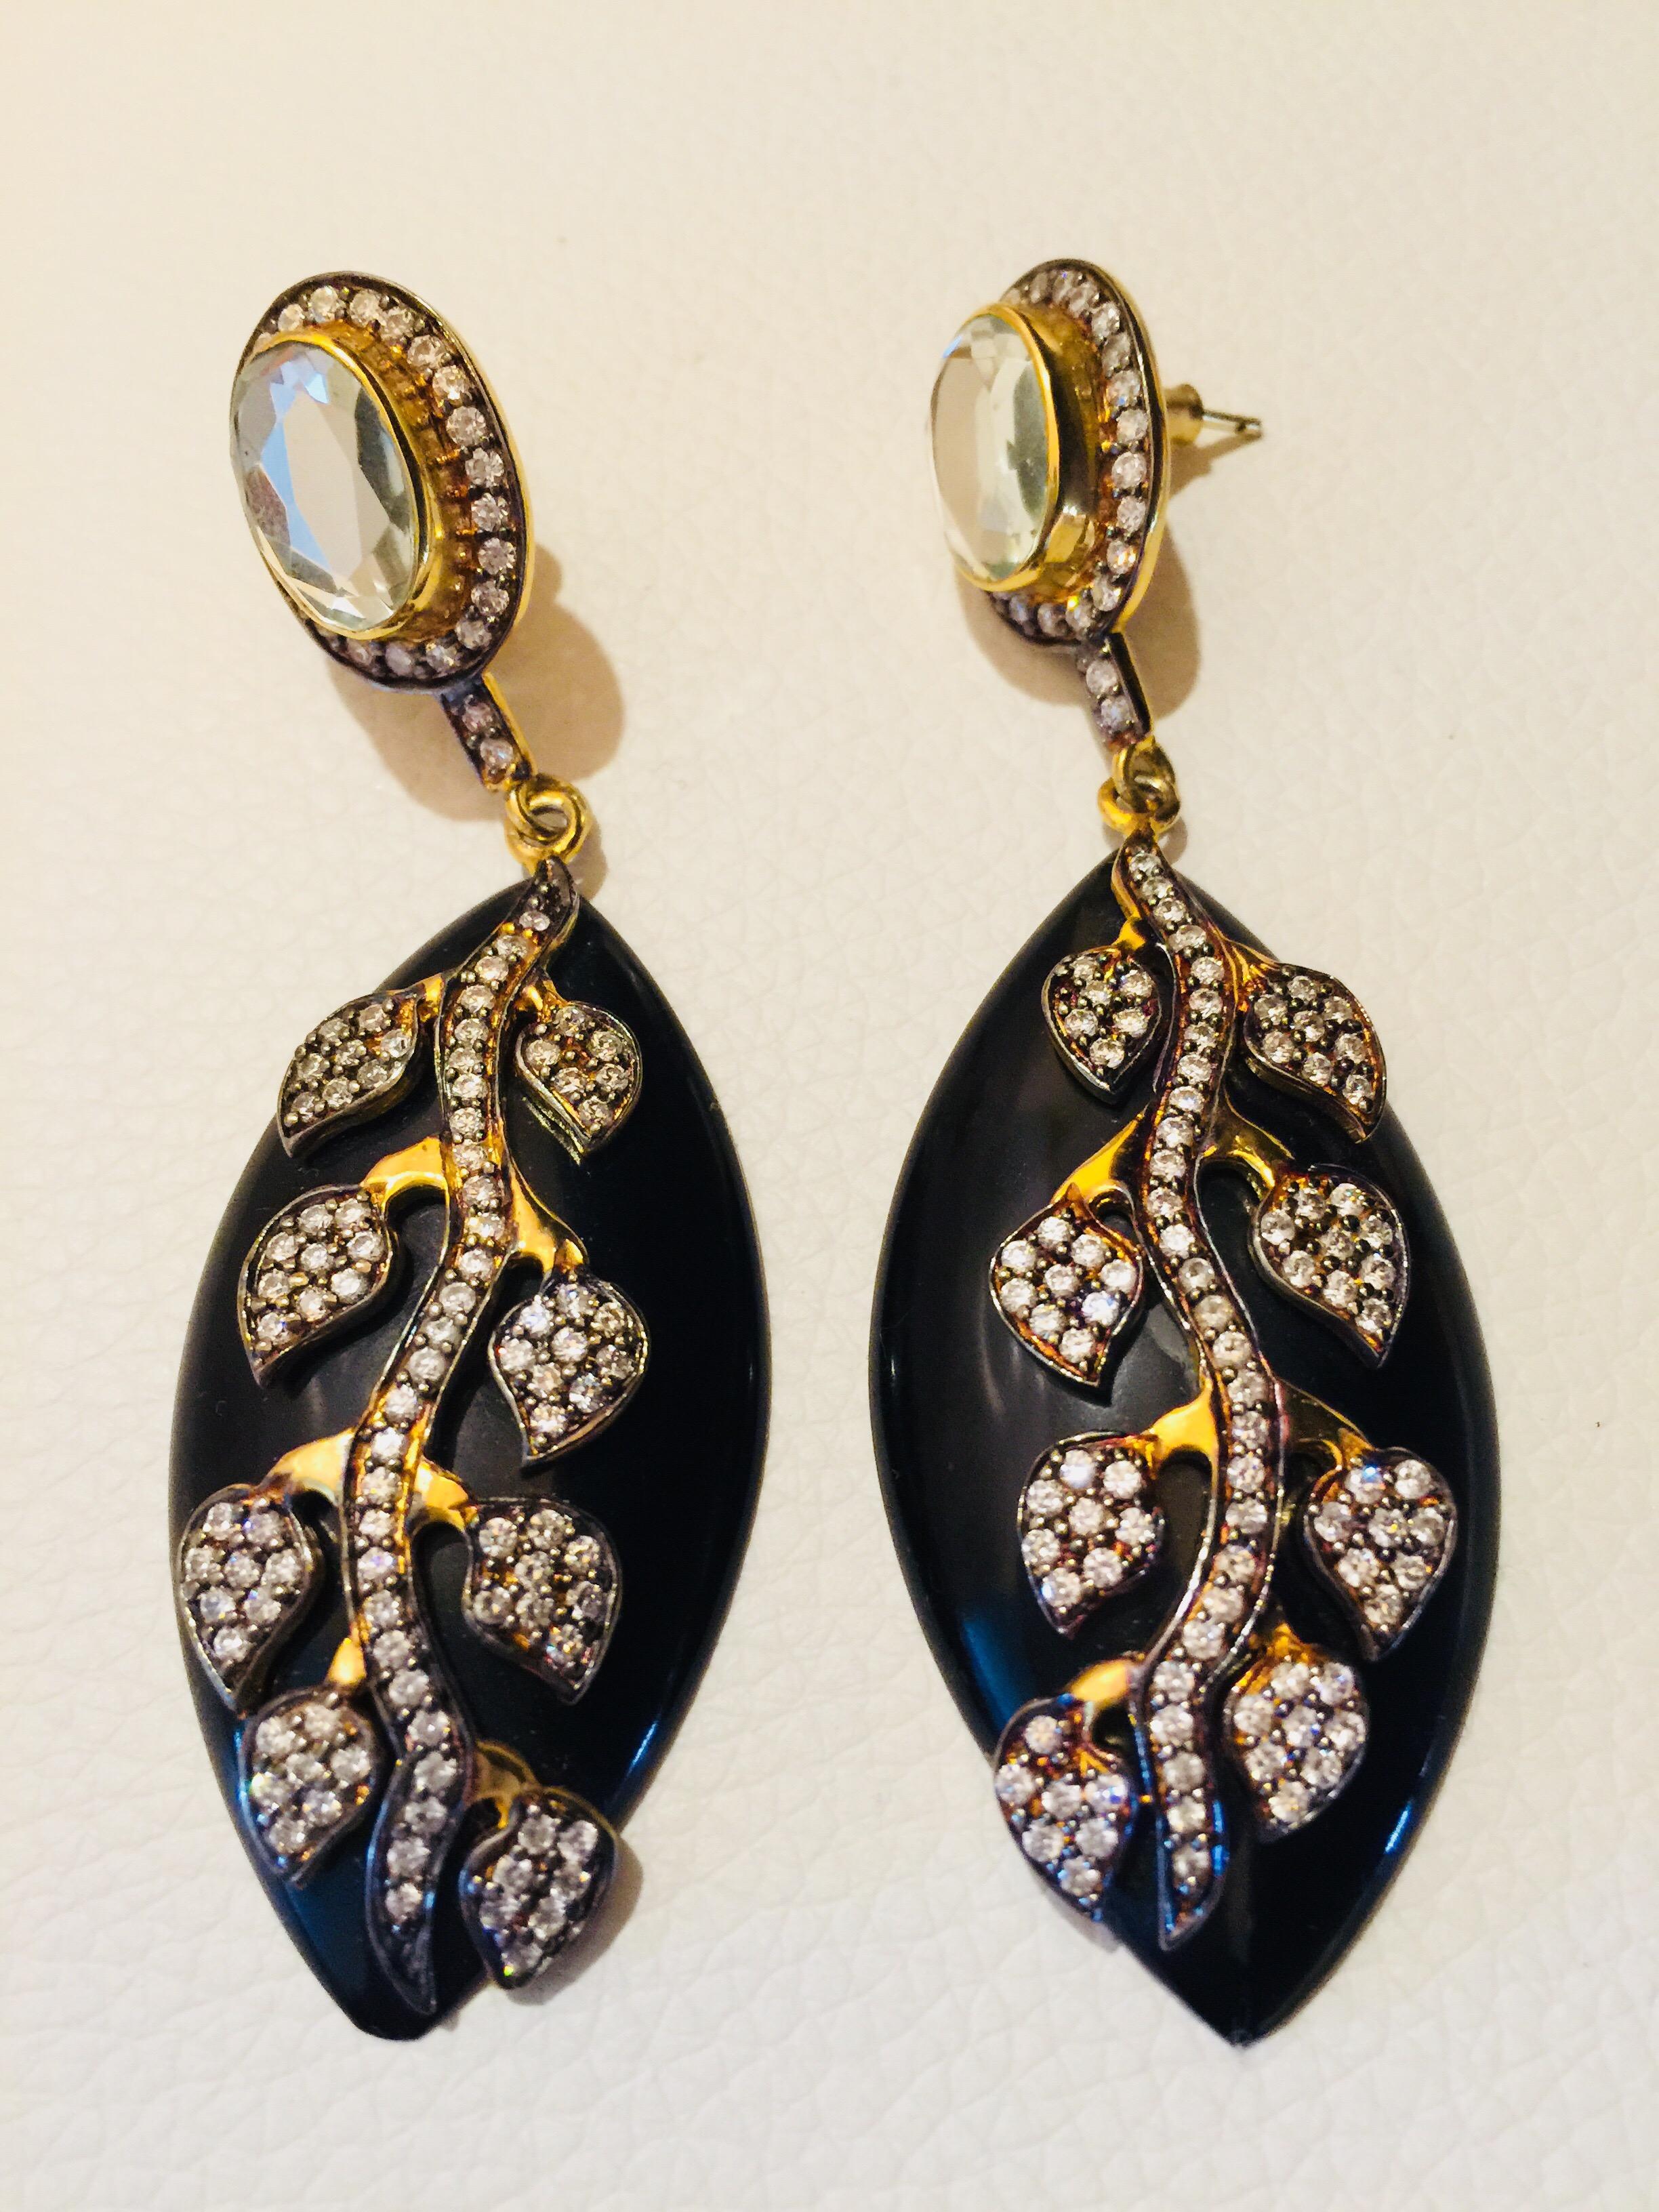 The gorgeous look of these gold, black and CZ leaf earrings is equaled only by the artisan craftsmanship and quality materials used to create them. Jet black ovals are enhanced with a crystal and gold 